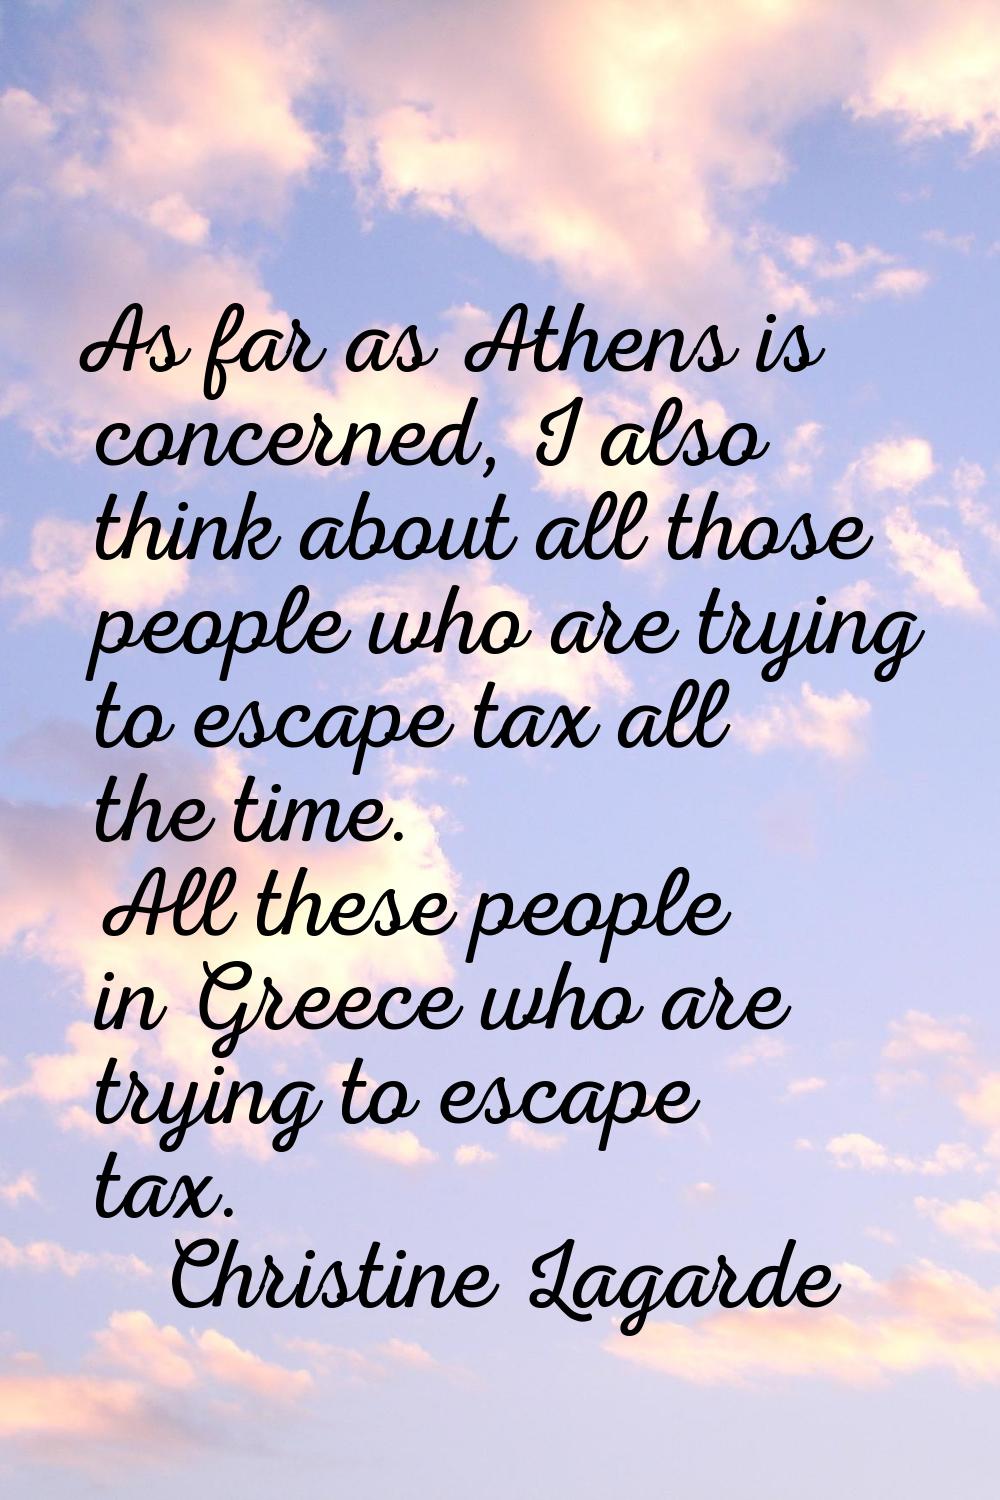 As far as Athens is concerned, I also think about all those people who are trying to escape tax all